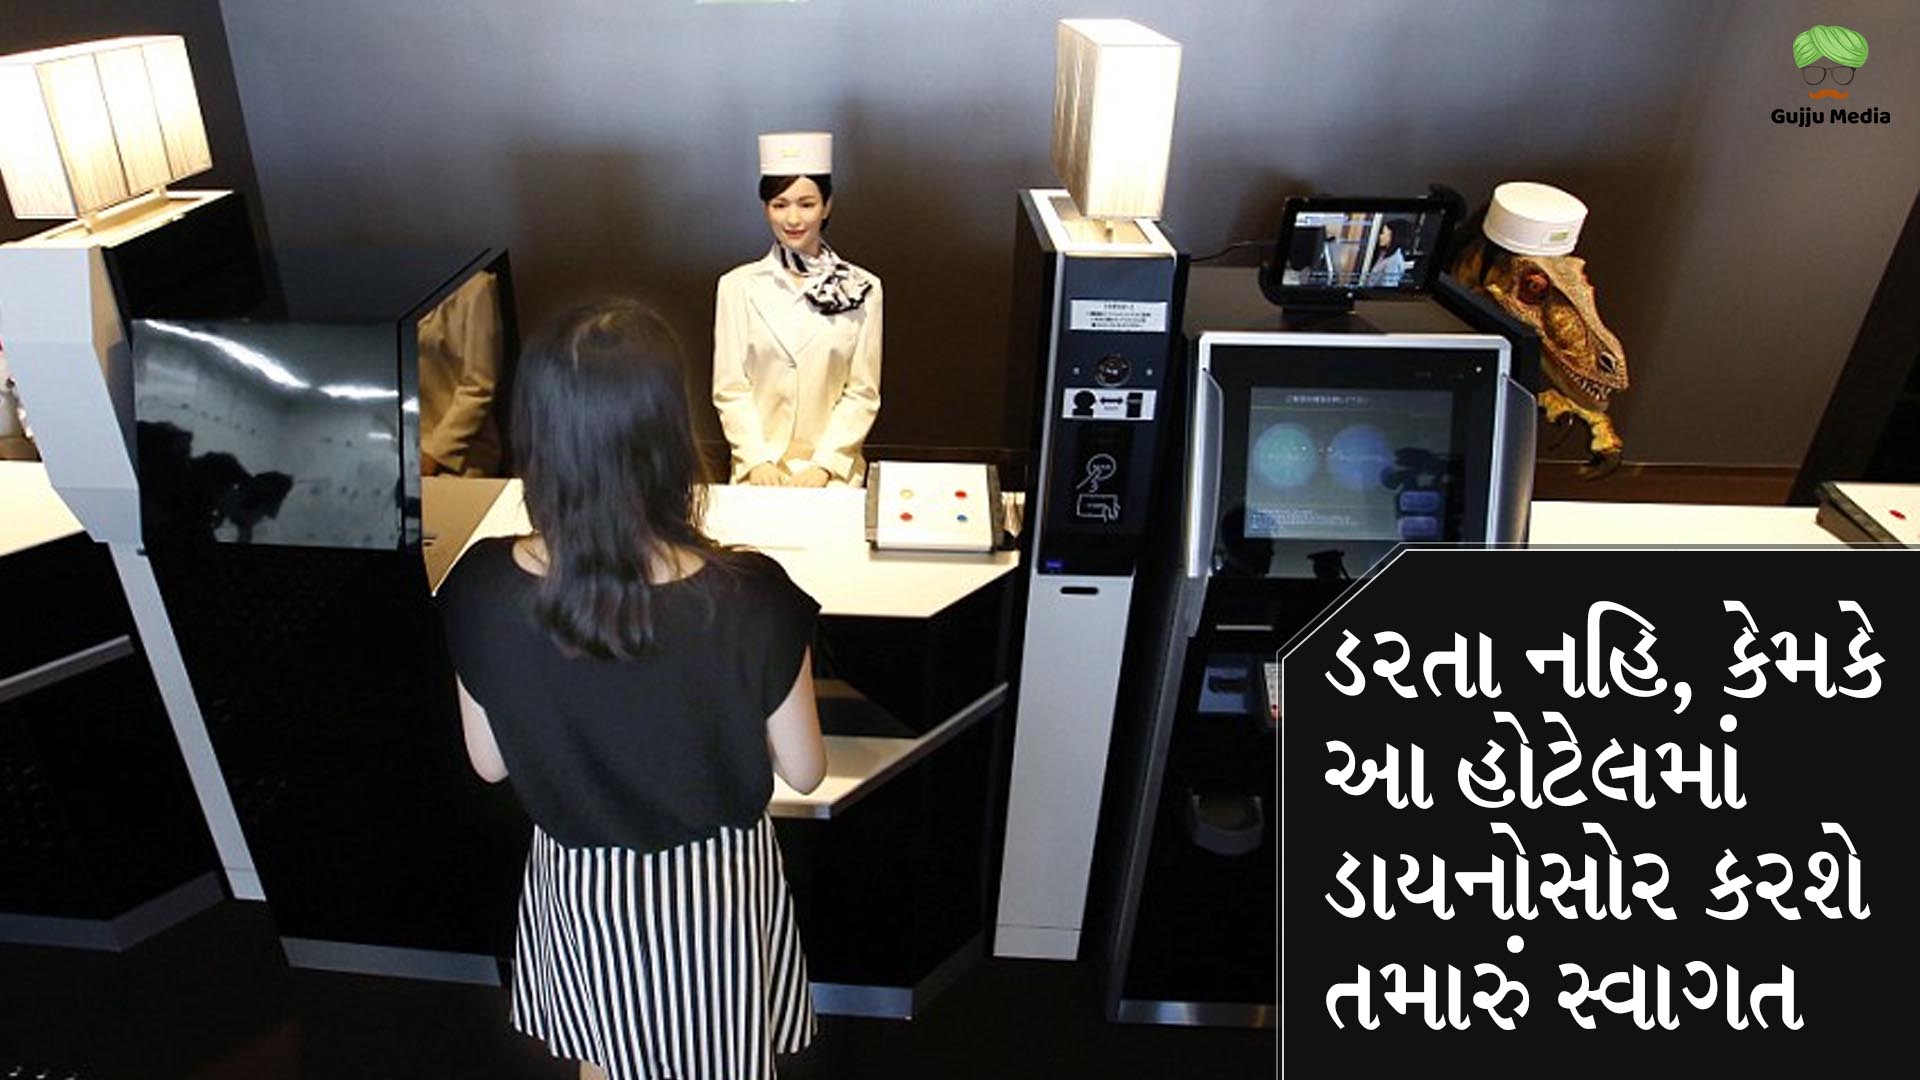 Japanese hotel staffed by ROBOTS features